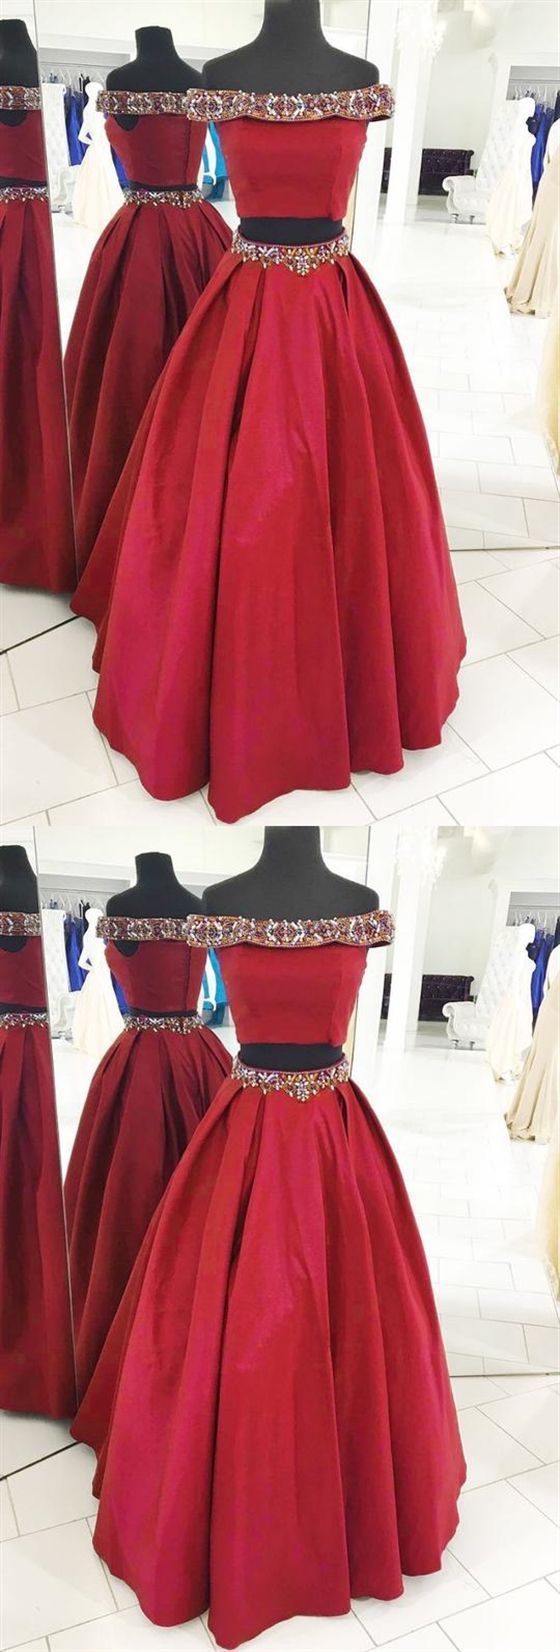 Burgundy Two Pieces Off Shoulder Beaded Evening Dresses Affordable Prom Dresses,p3053